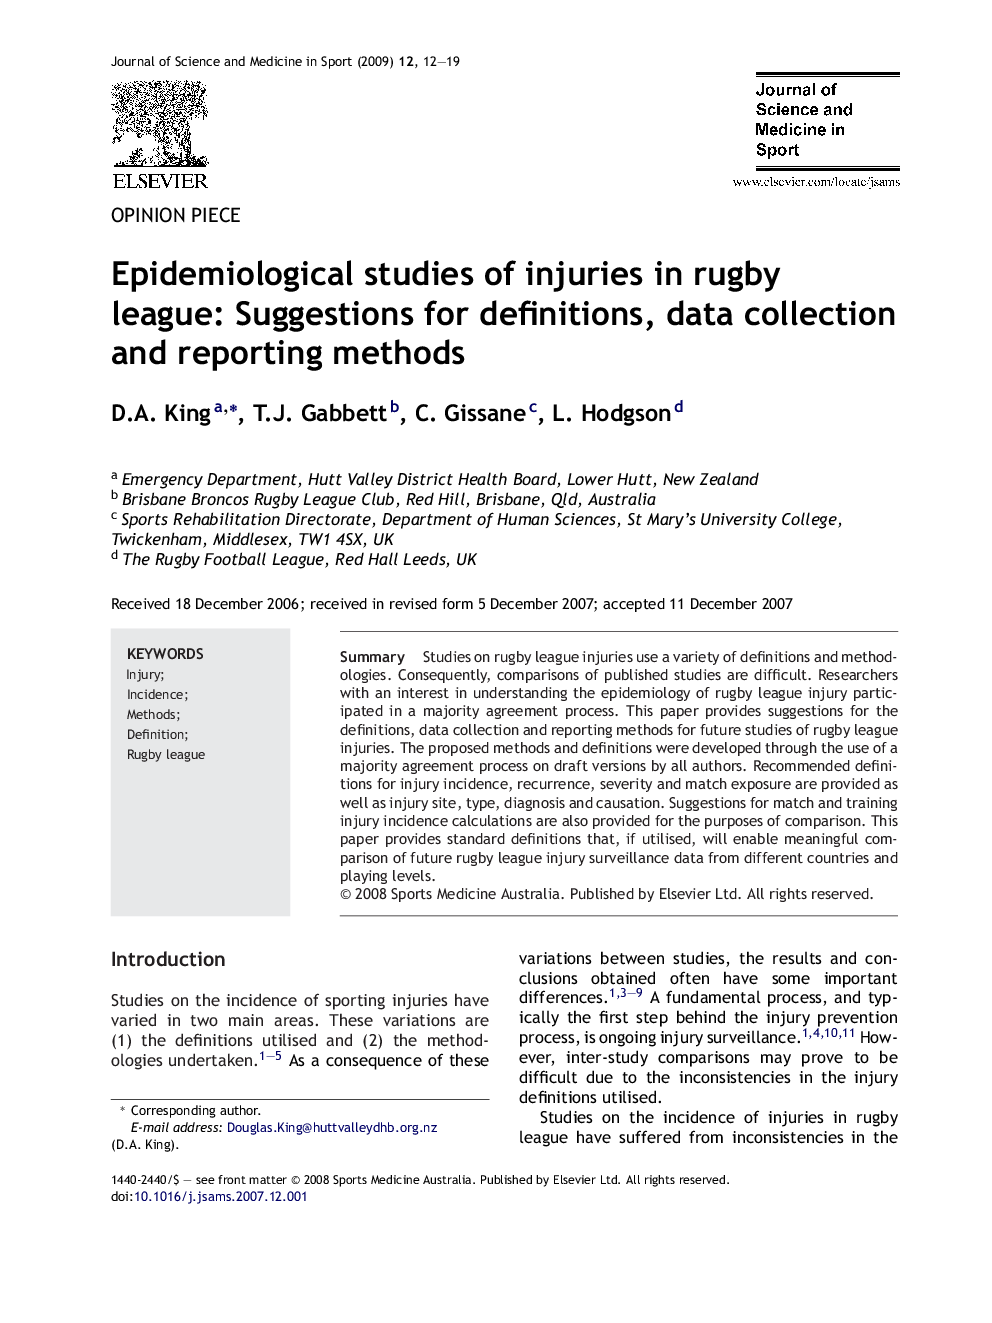 Epidemiological studies of injuries in rugby league: Suggestions for definitions, data collection and reporting methods